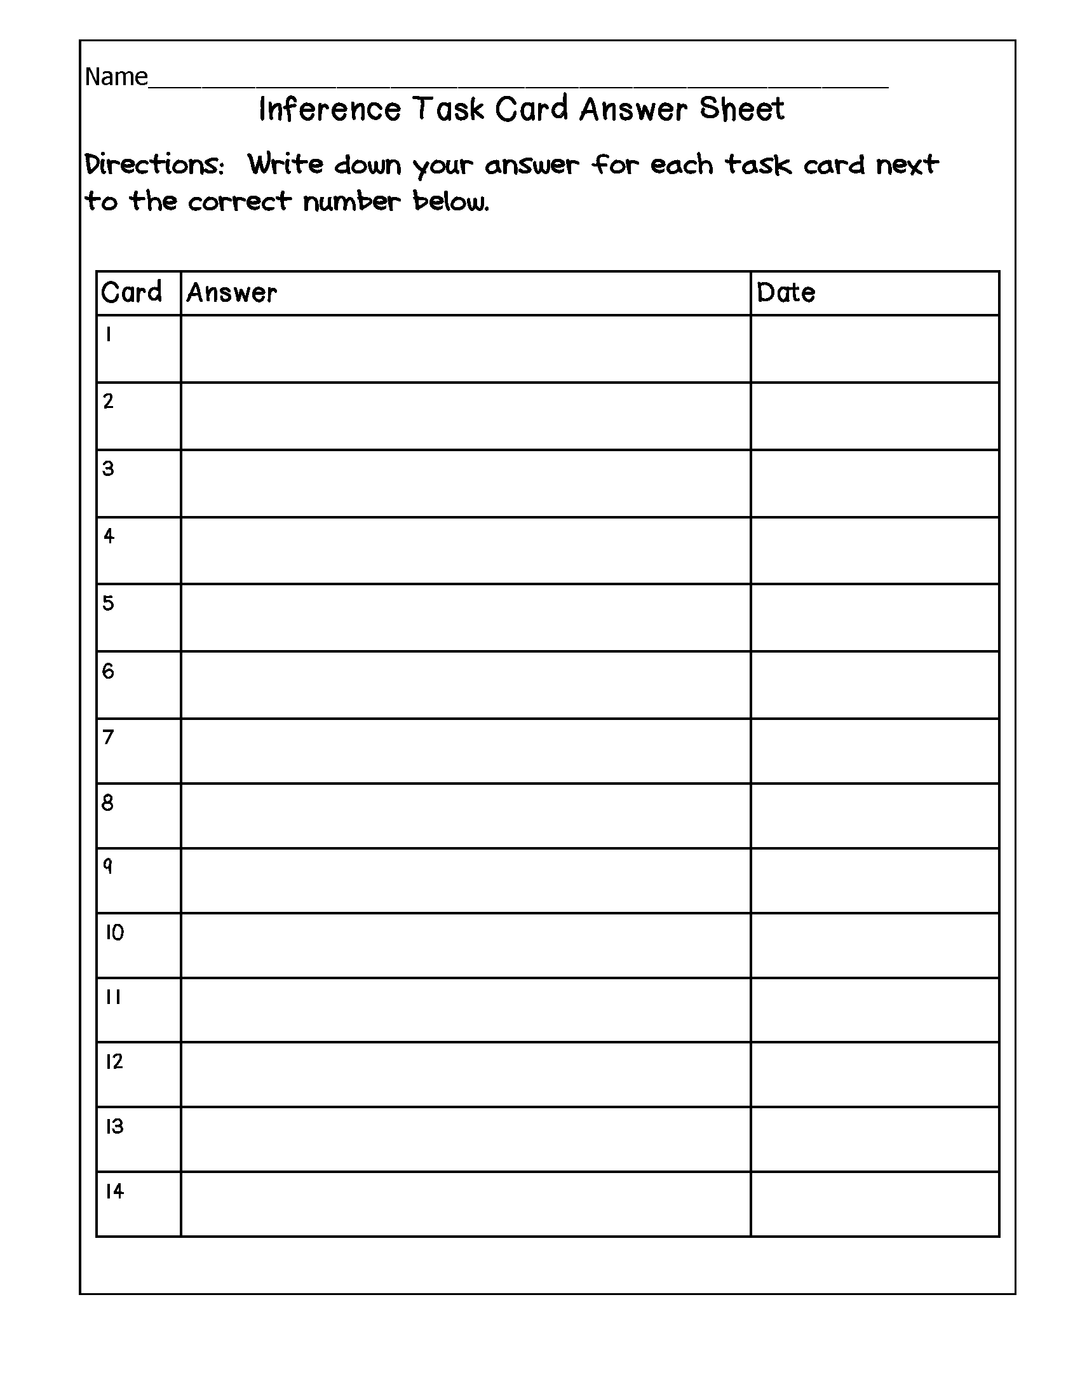 Self-Teaching Inference Task Cards {Grades 3-5}